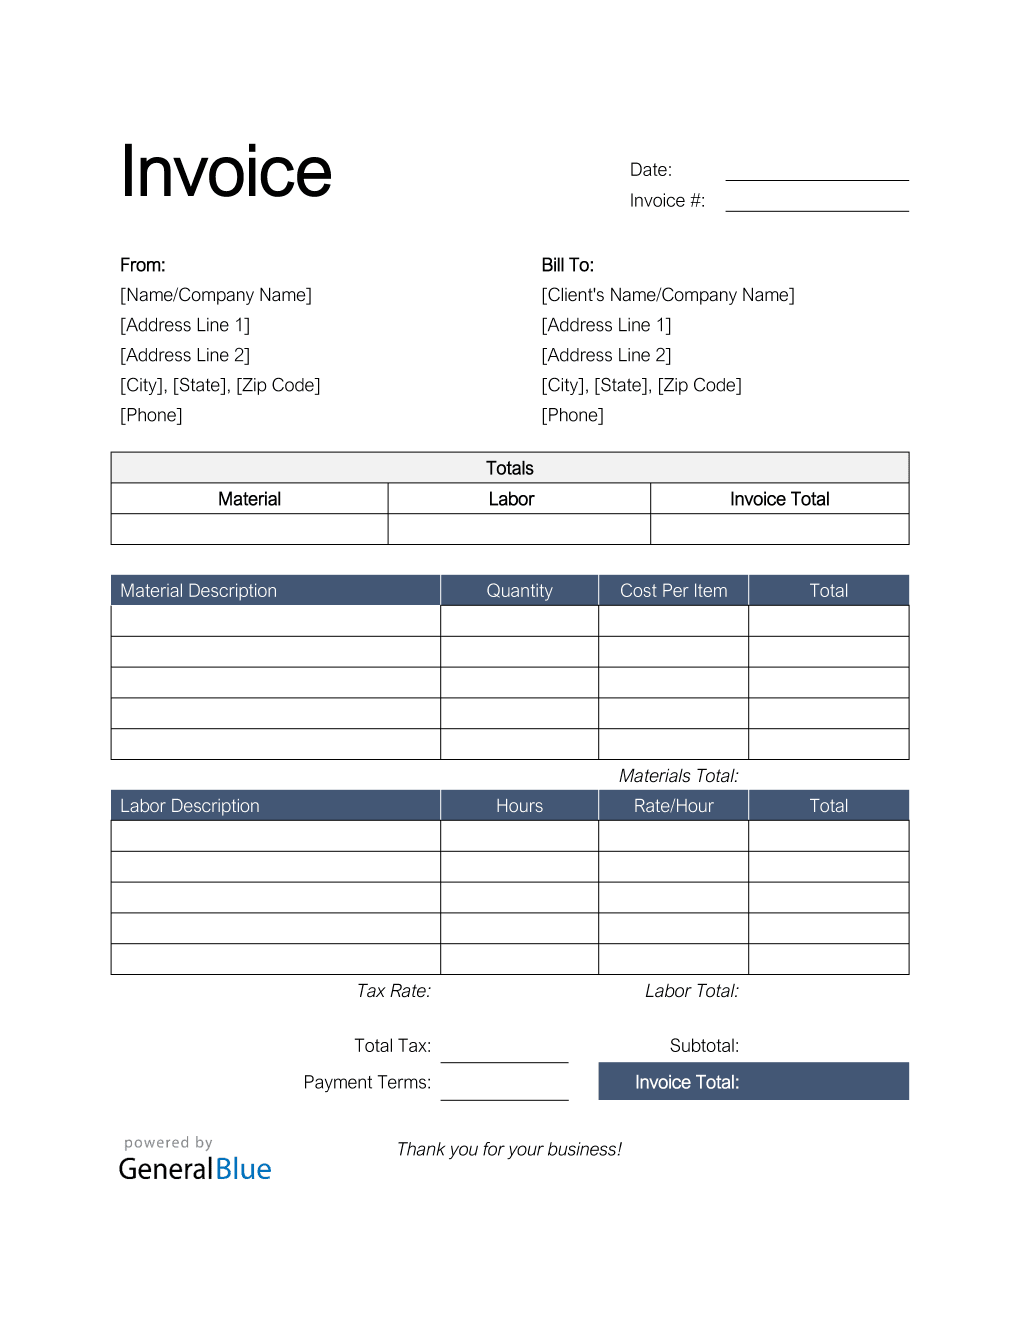 An example of a labor and materials printable invoice template